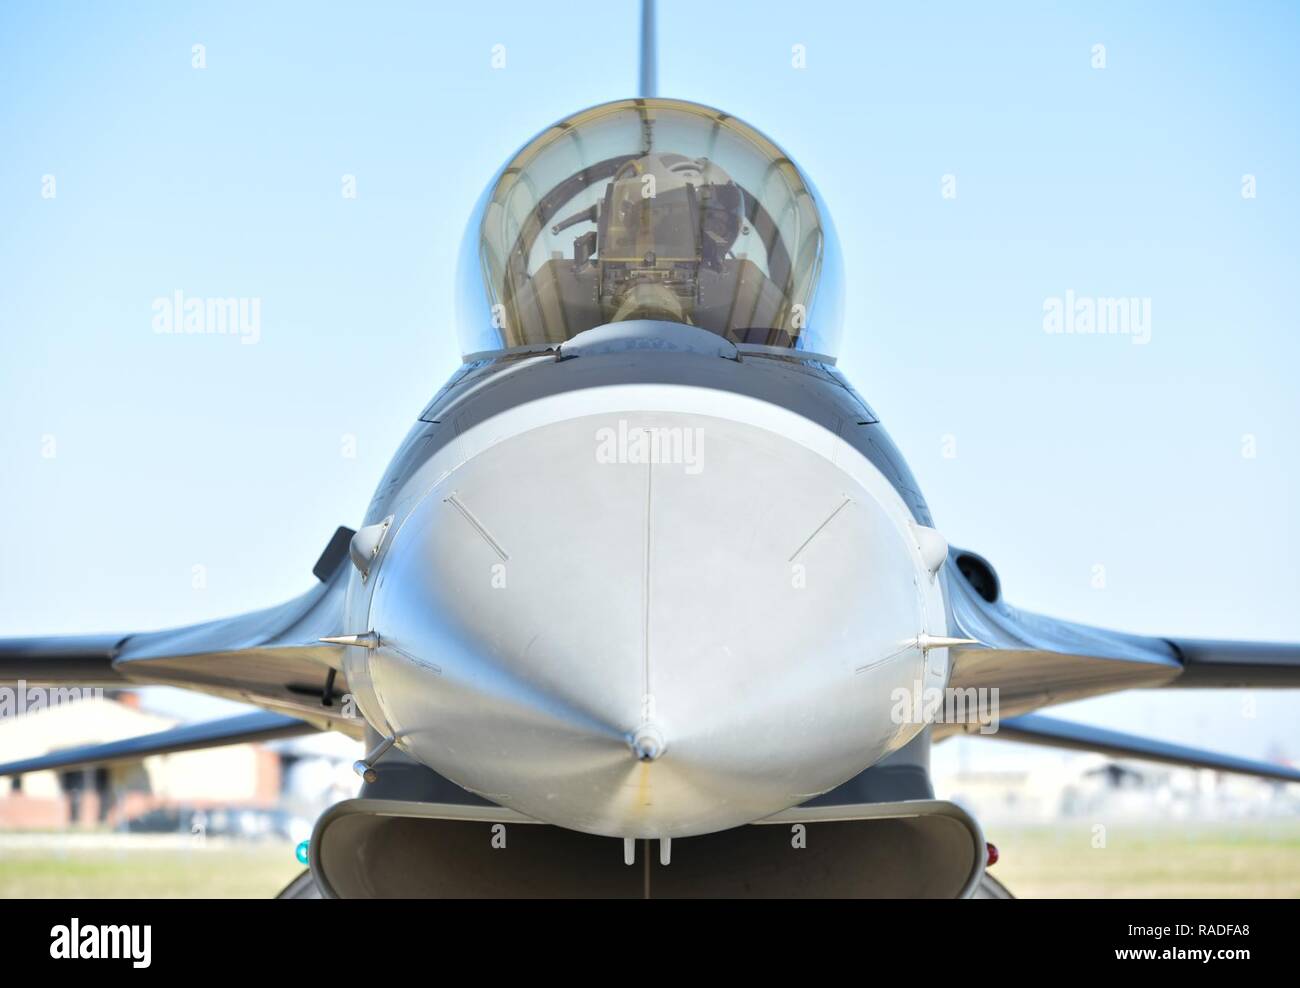 A student pilot assigned to the 149th Fighter Wing checks the controls of an F-16 Fighting Falcon during a pre-flight inspection at Joint Base San Antonio-Lackland, Texas, Feb. 1, 2017. The 149th FW's primary federal mission is to train pilots to operate and fly the F-16. Stock Photo